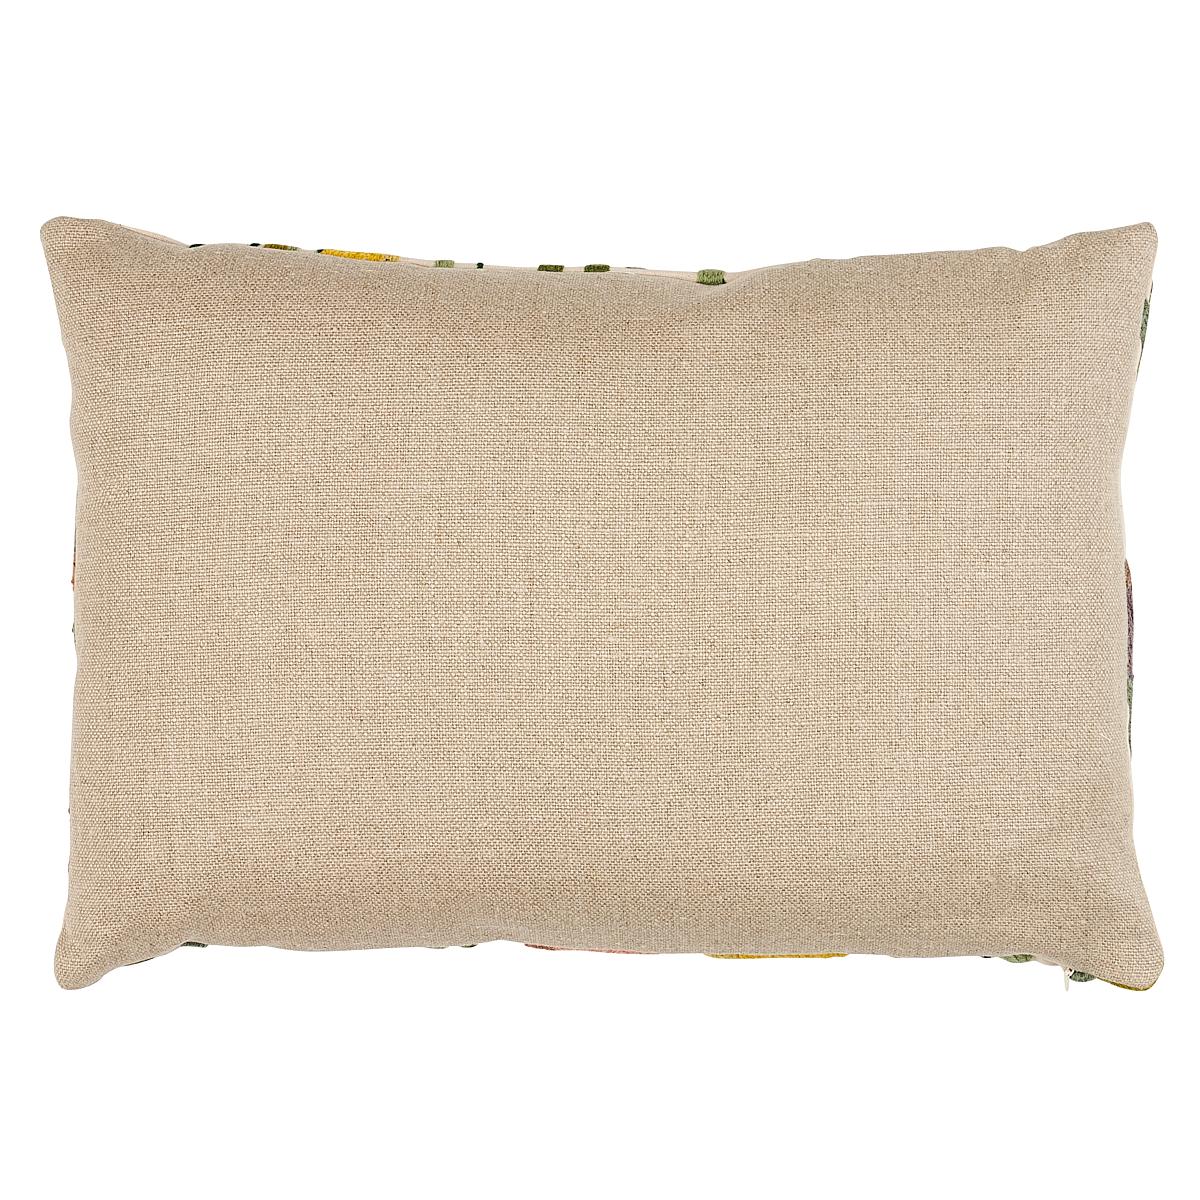 Deco Flower Embroidery Pillow_MULTI